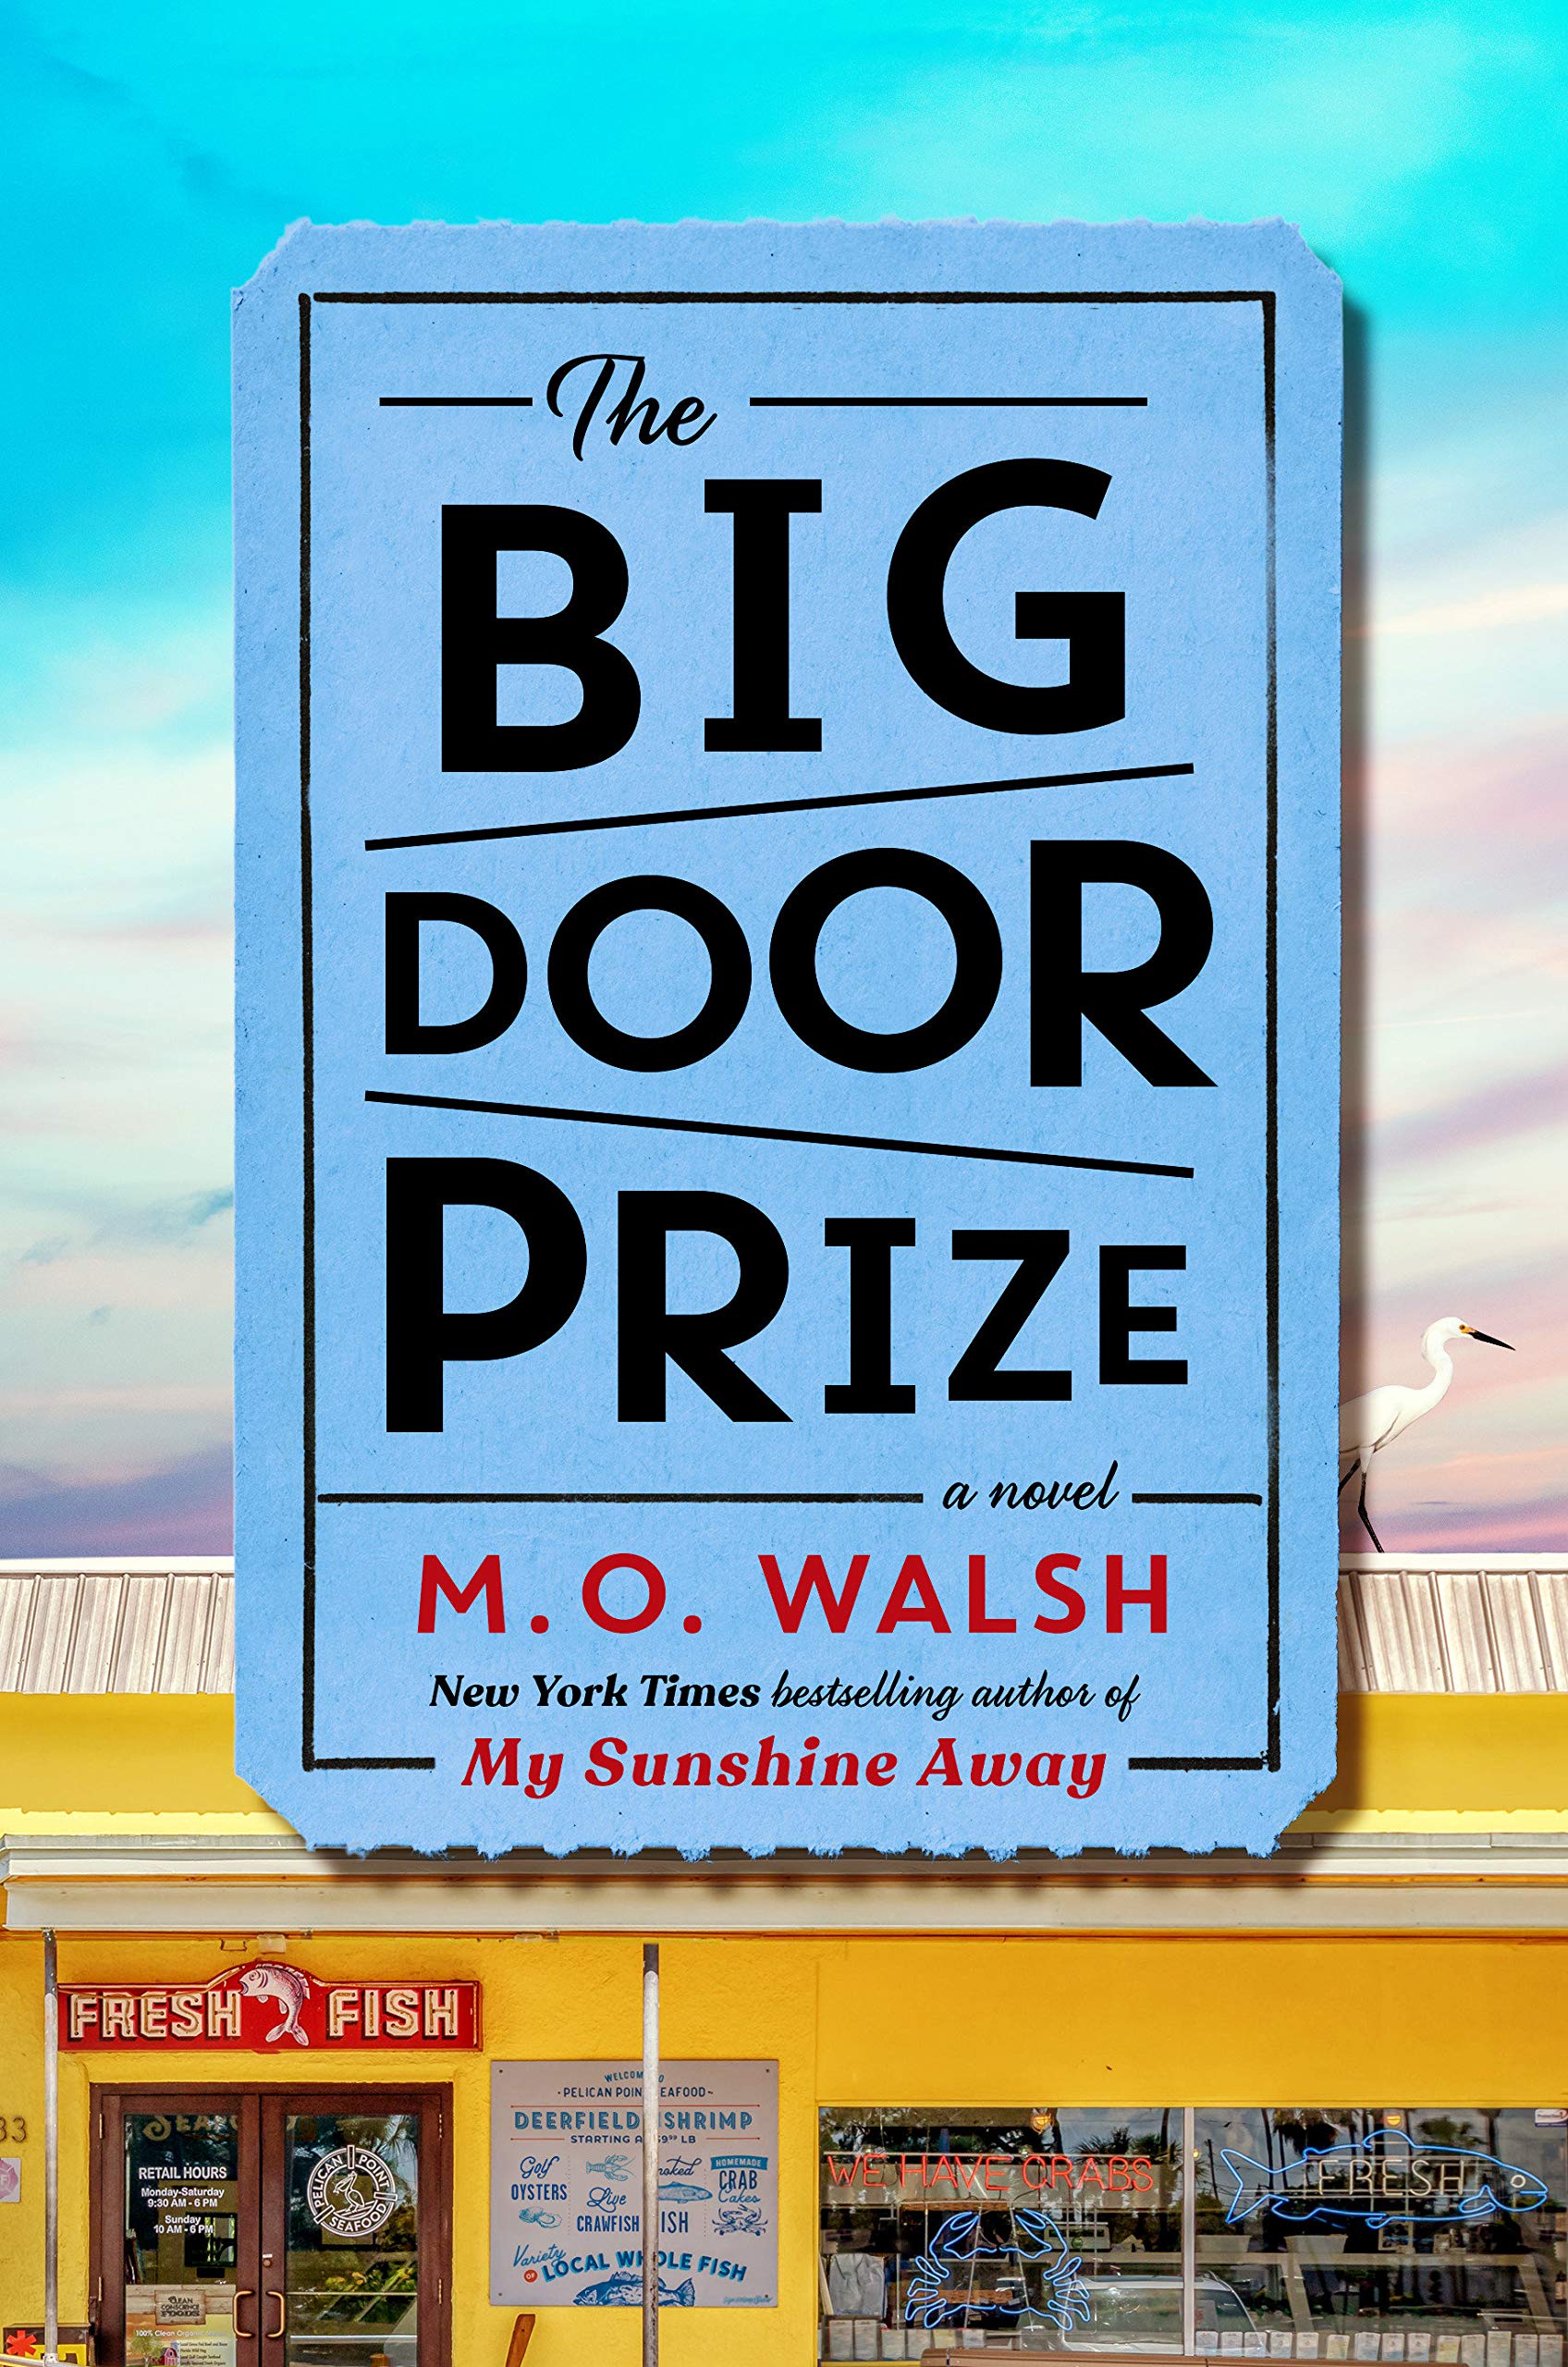 The Big Door Prize by M. O. Walsh